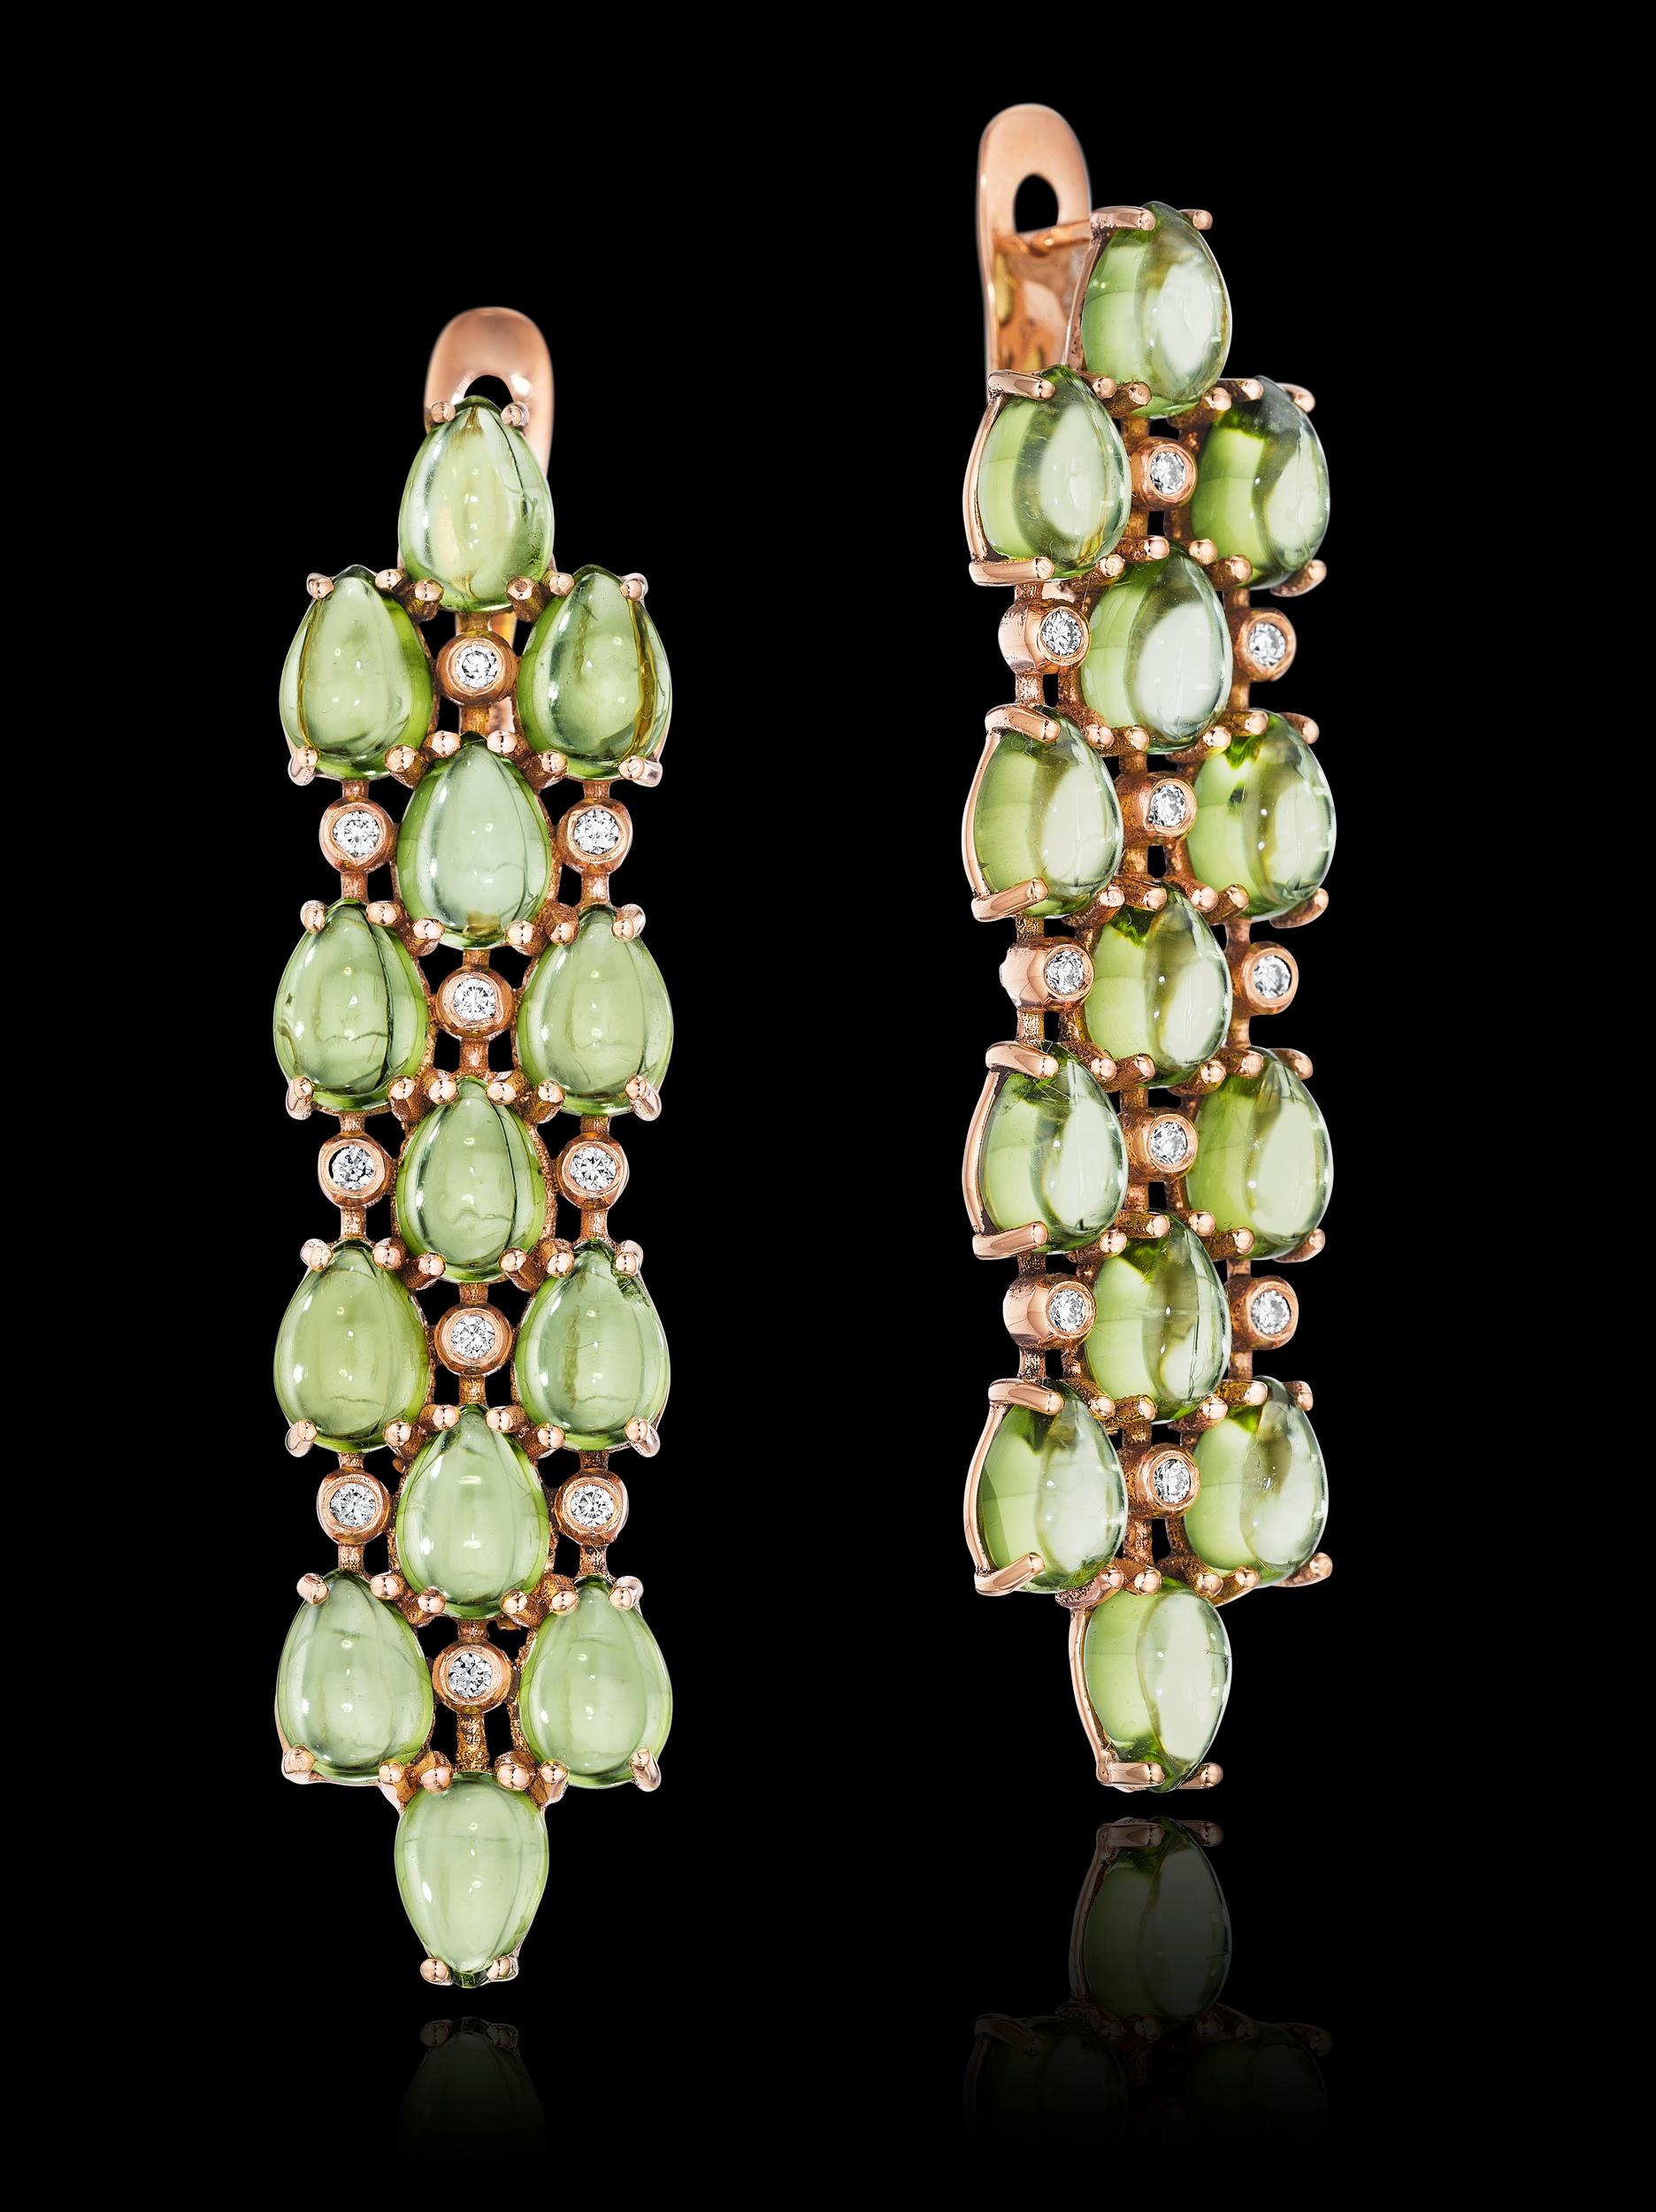 Limited Edition YOKI design, features 26, approx. 26.9cts 5x7mm Cabochon Pear Shaped Peridot. Total Diamond weight is approx. 0.3cts. Earrings are set on 18 karat Rose gold. Earring measures approx. 1.2cm face width across and 5.1cm face length.